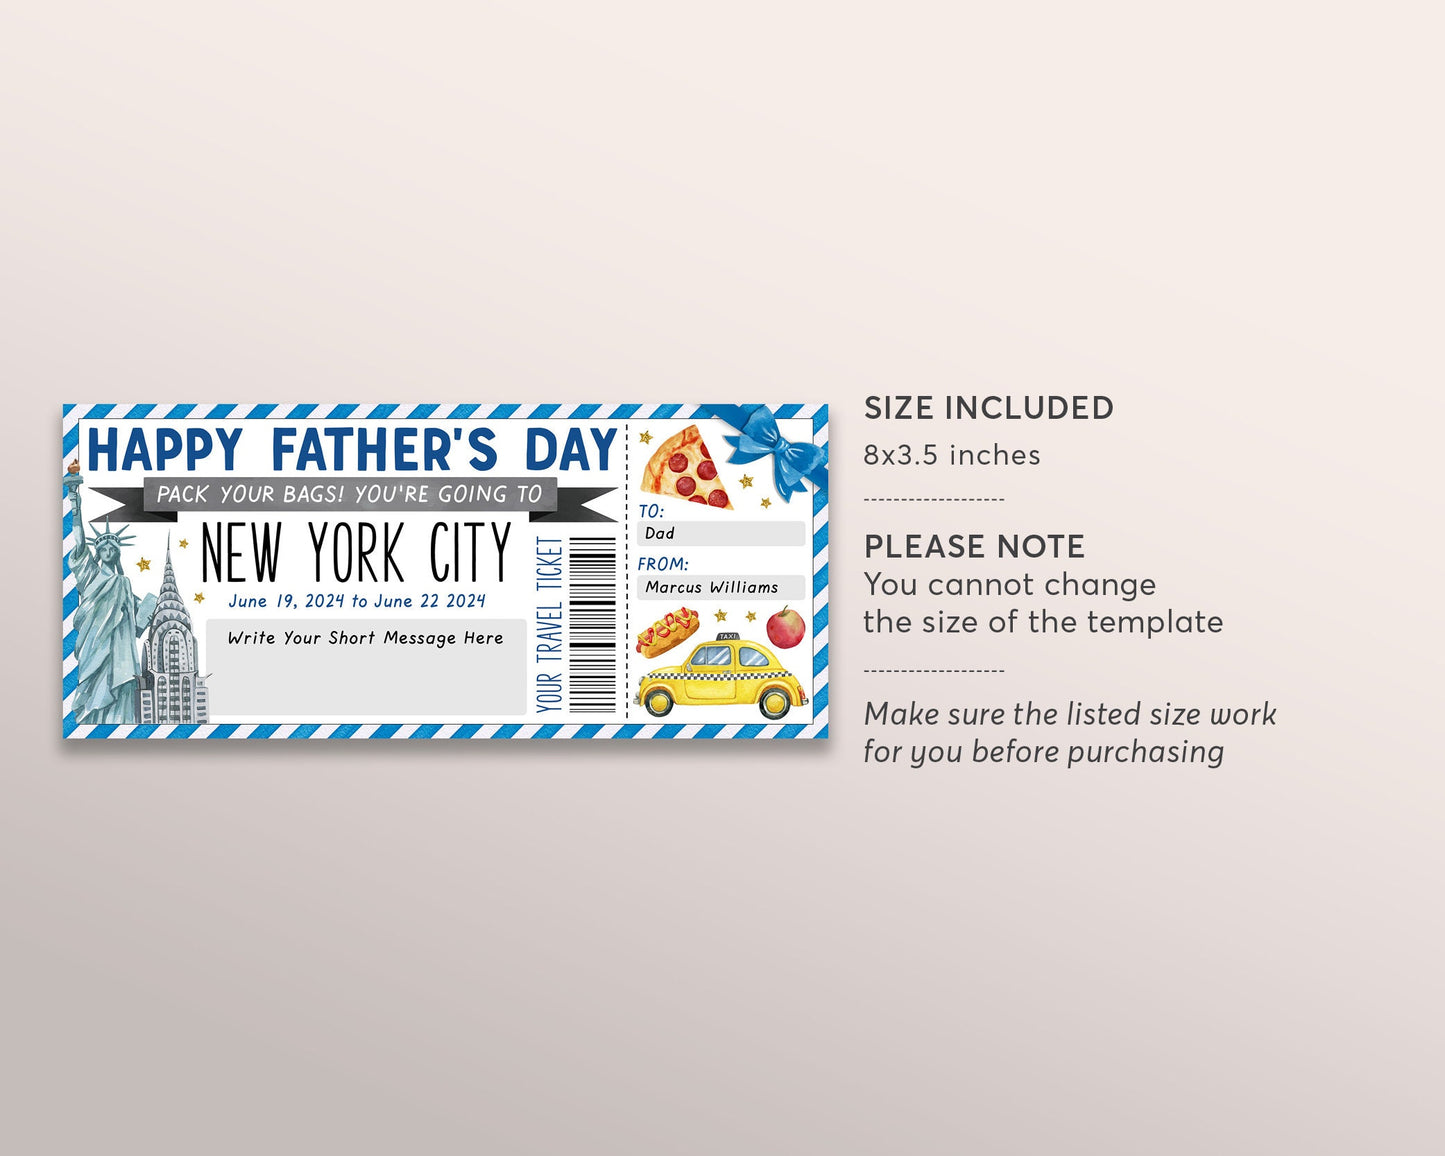 Fathers Day New York City Trip Ticket Editable Template, Surprise Travel Vacation Gift Certificate For Dad, NYC Trip Reveal, Pack Your Bags